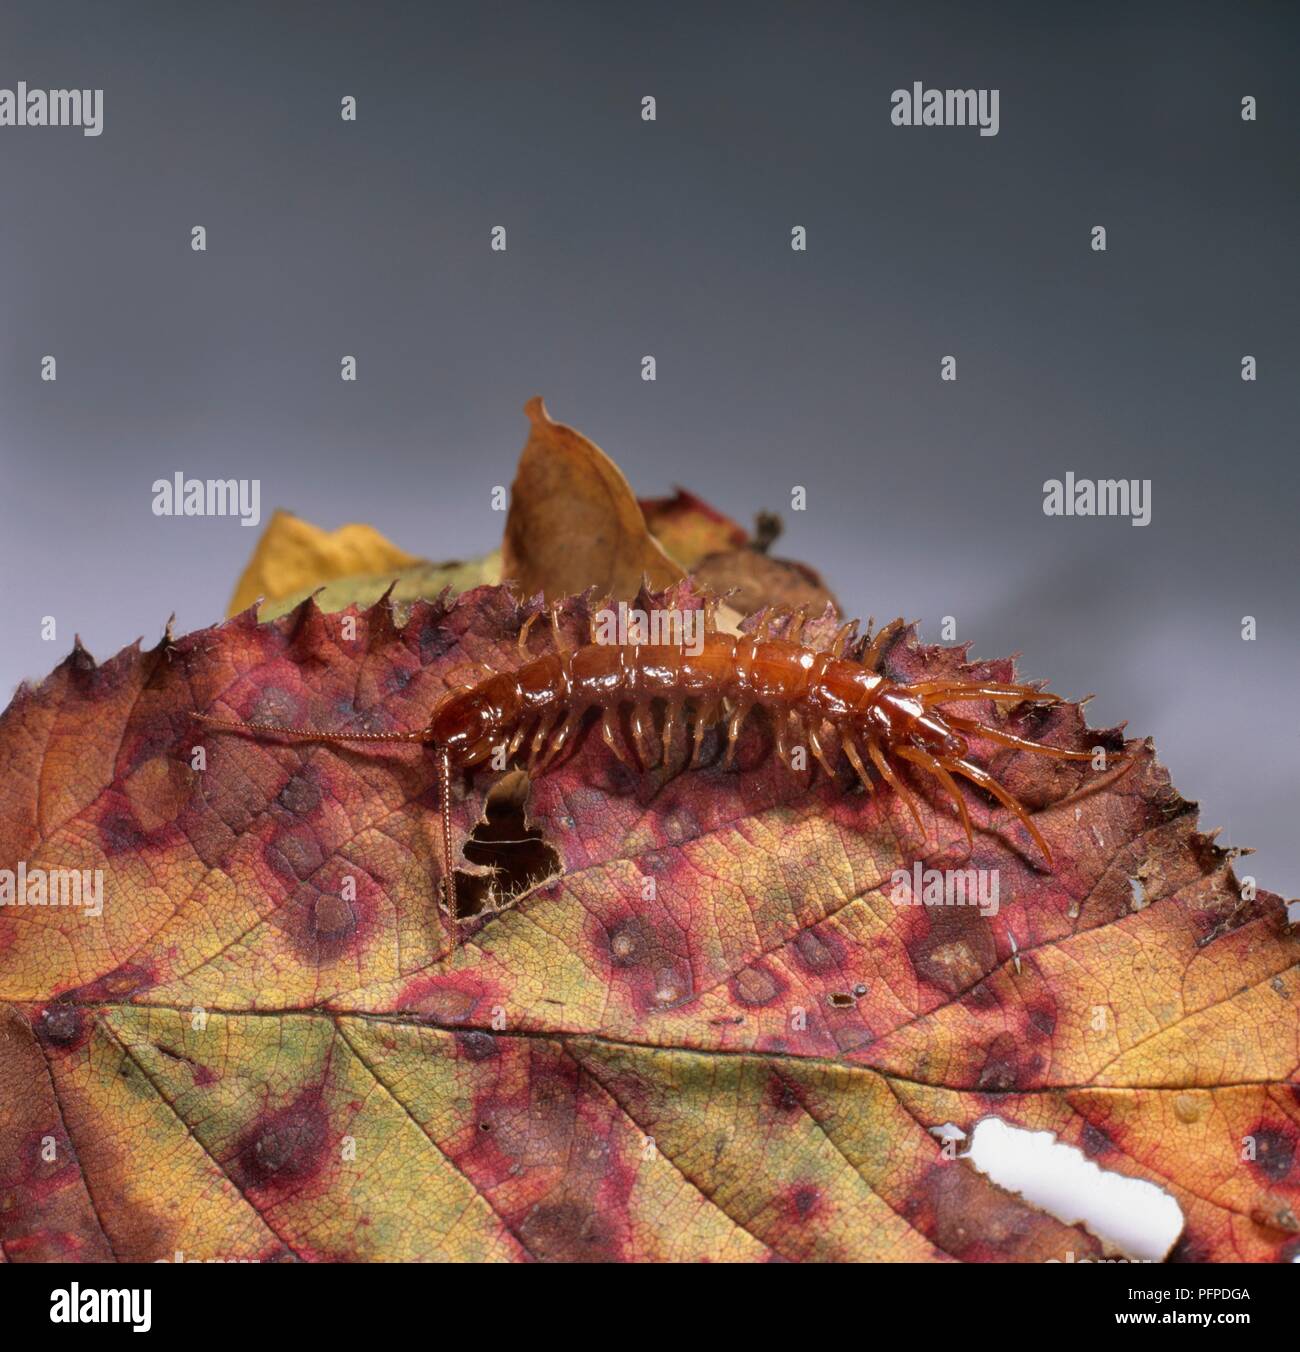 Centipede (Lithobius forficatus) eating away at a leaf Stock Photo